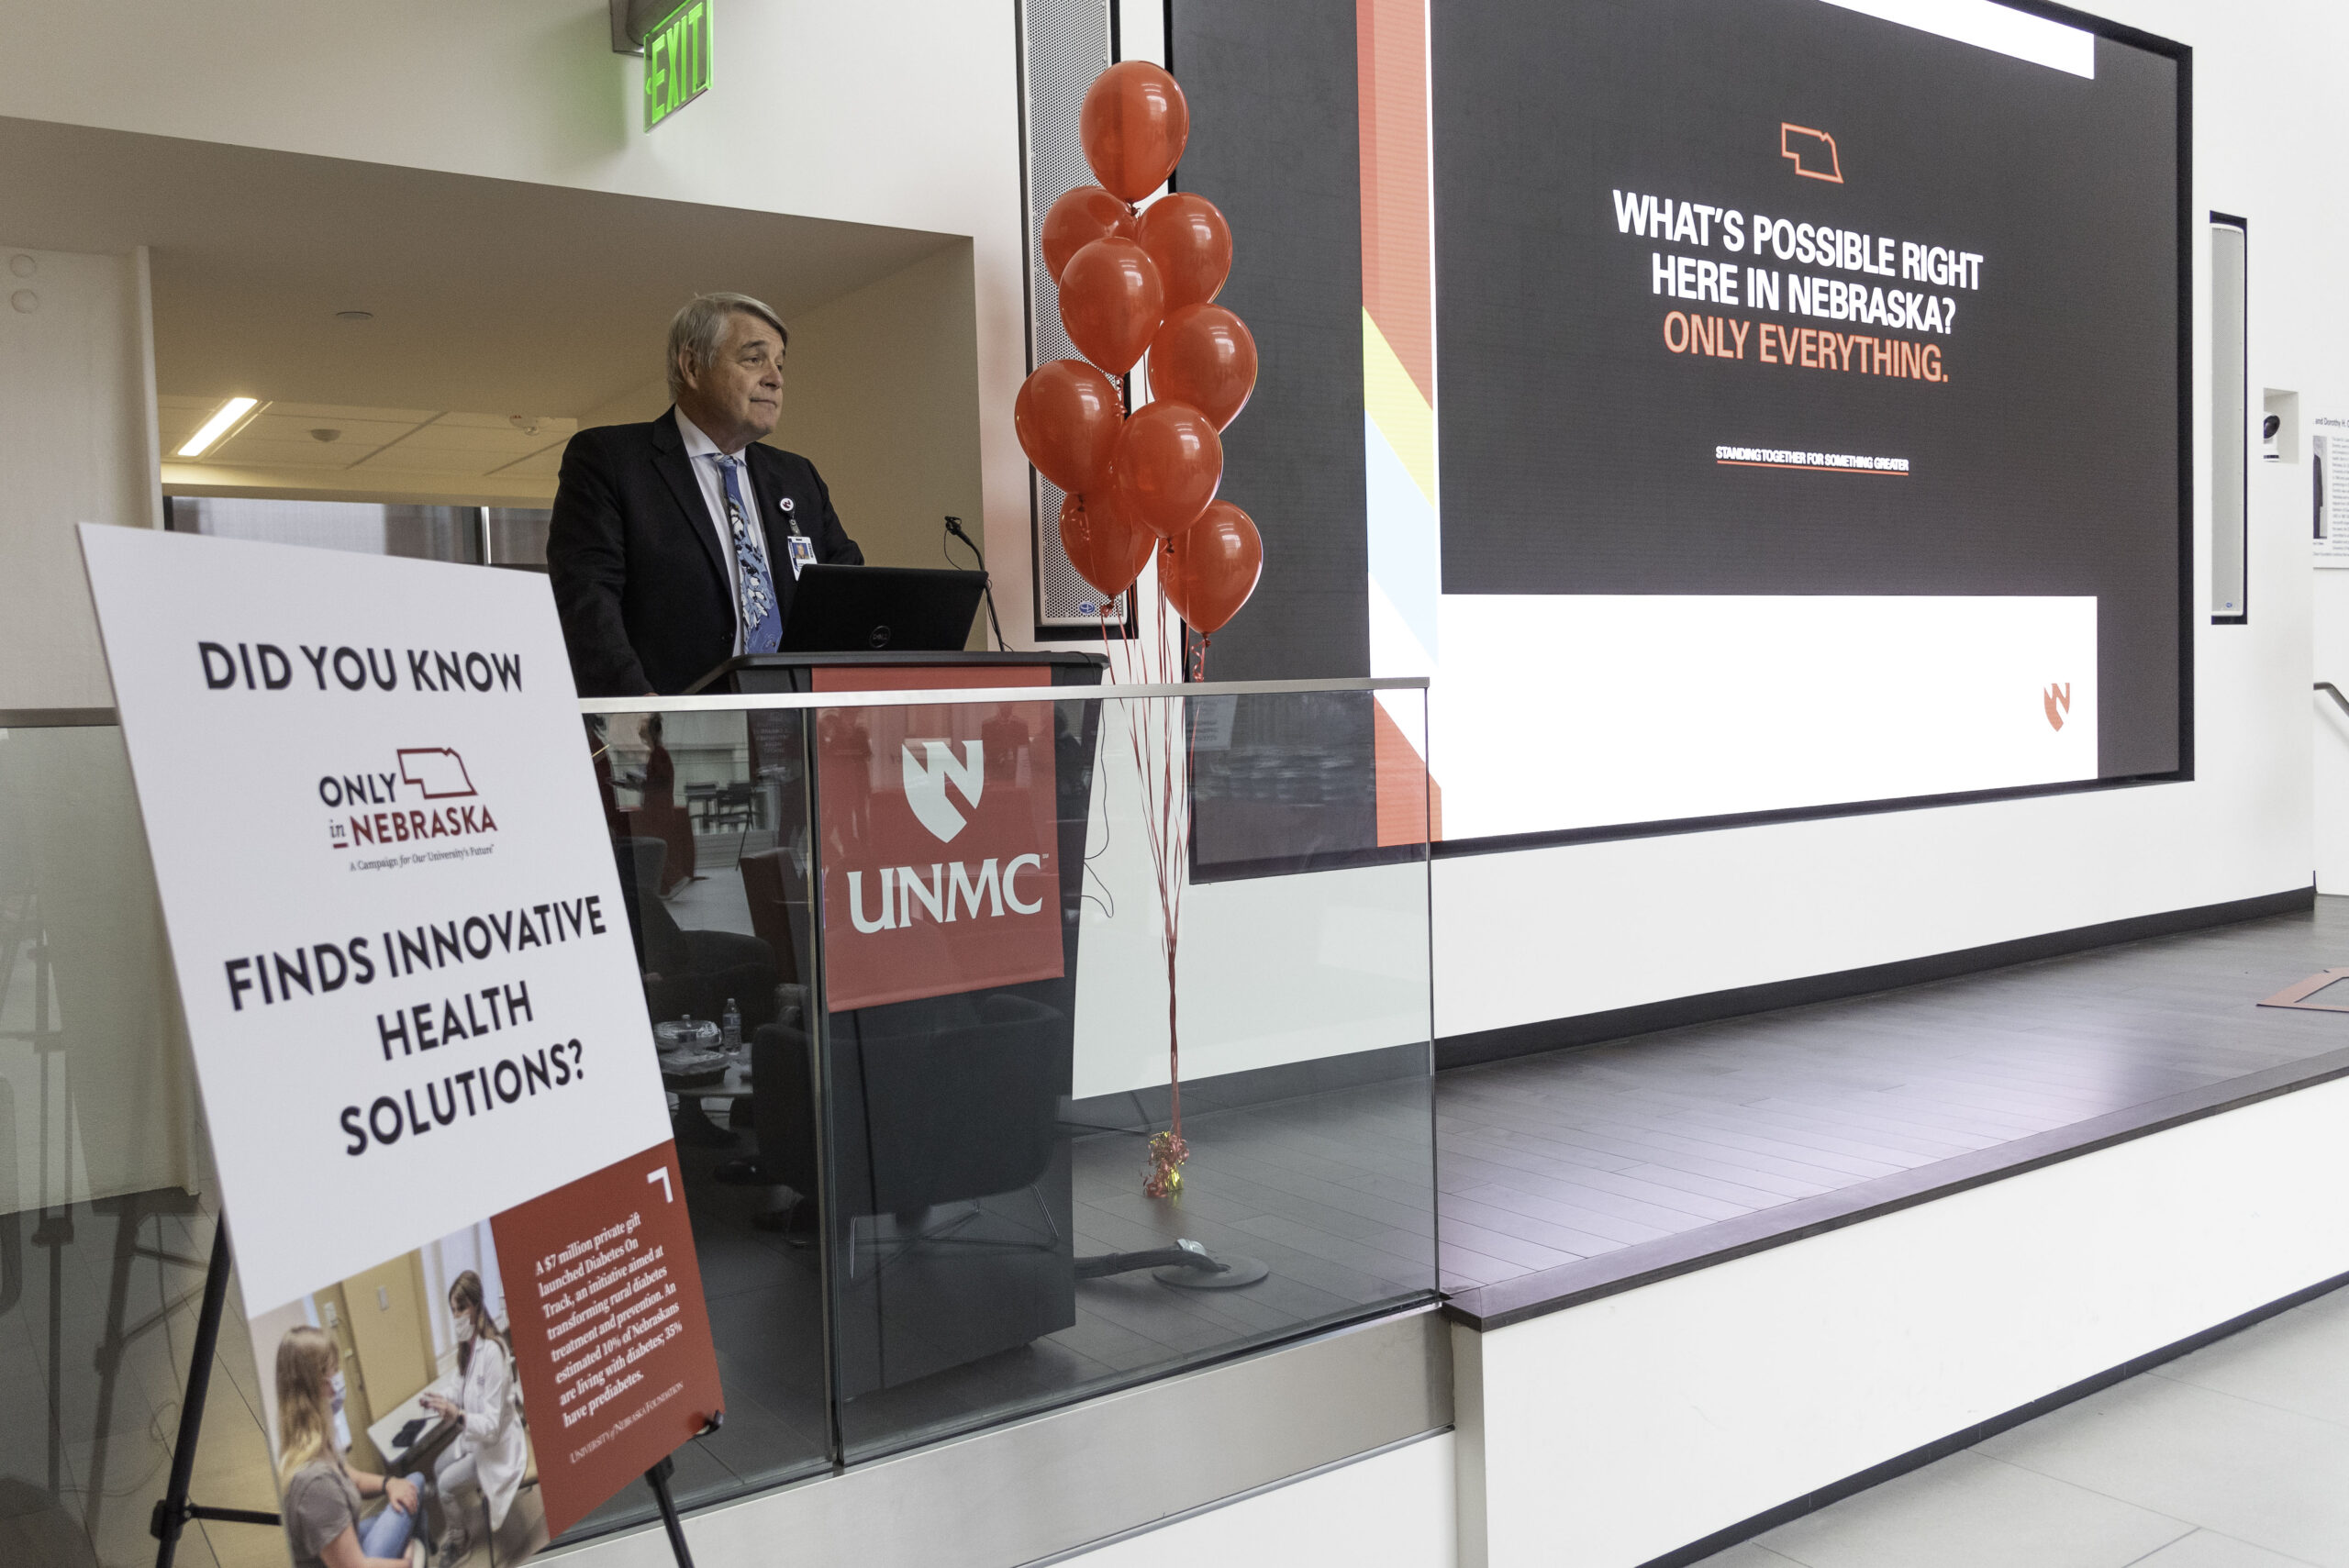 Nebraska Medicine CEO Jim Linder&comma; MD&comma; co-chair of the med center&apos;s Only in Nebraska fundraising campaign along with his wife&comma; Karen&comma; speaks at the kickoff rally for the drive on Thursday&period;